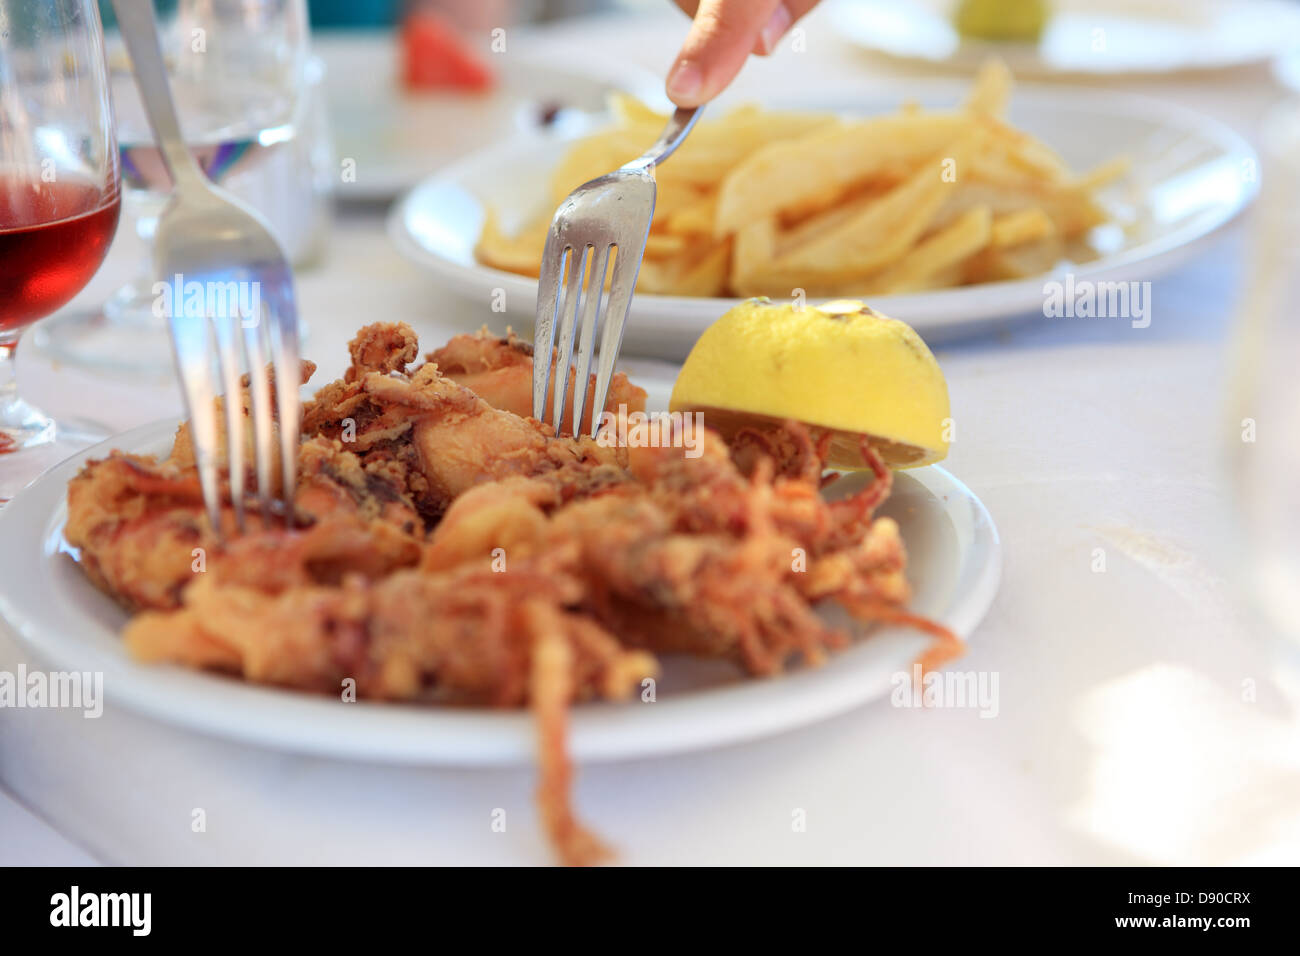 Forks picking up a piece of deep fried squid or Calamari from a plate in a Greek restaurant Stock Photo